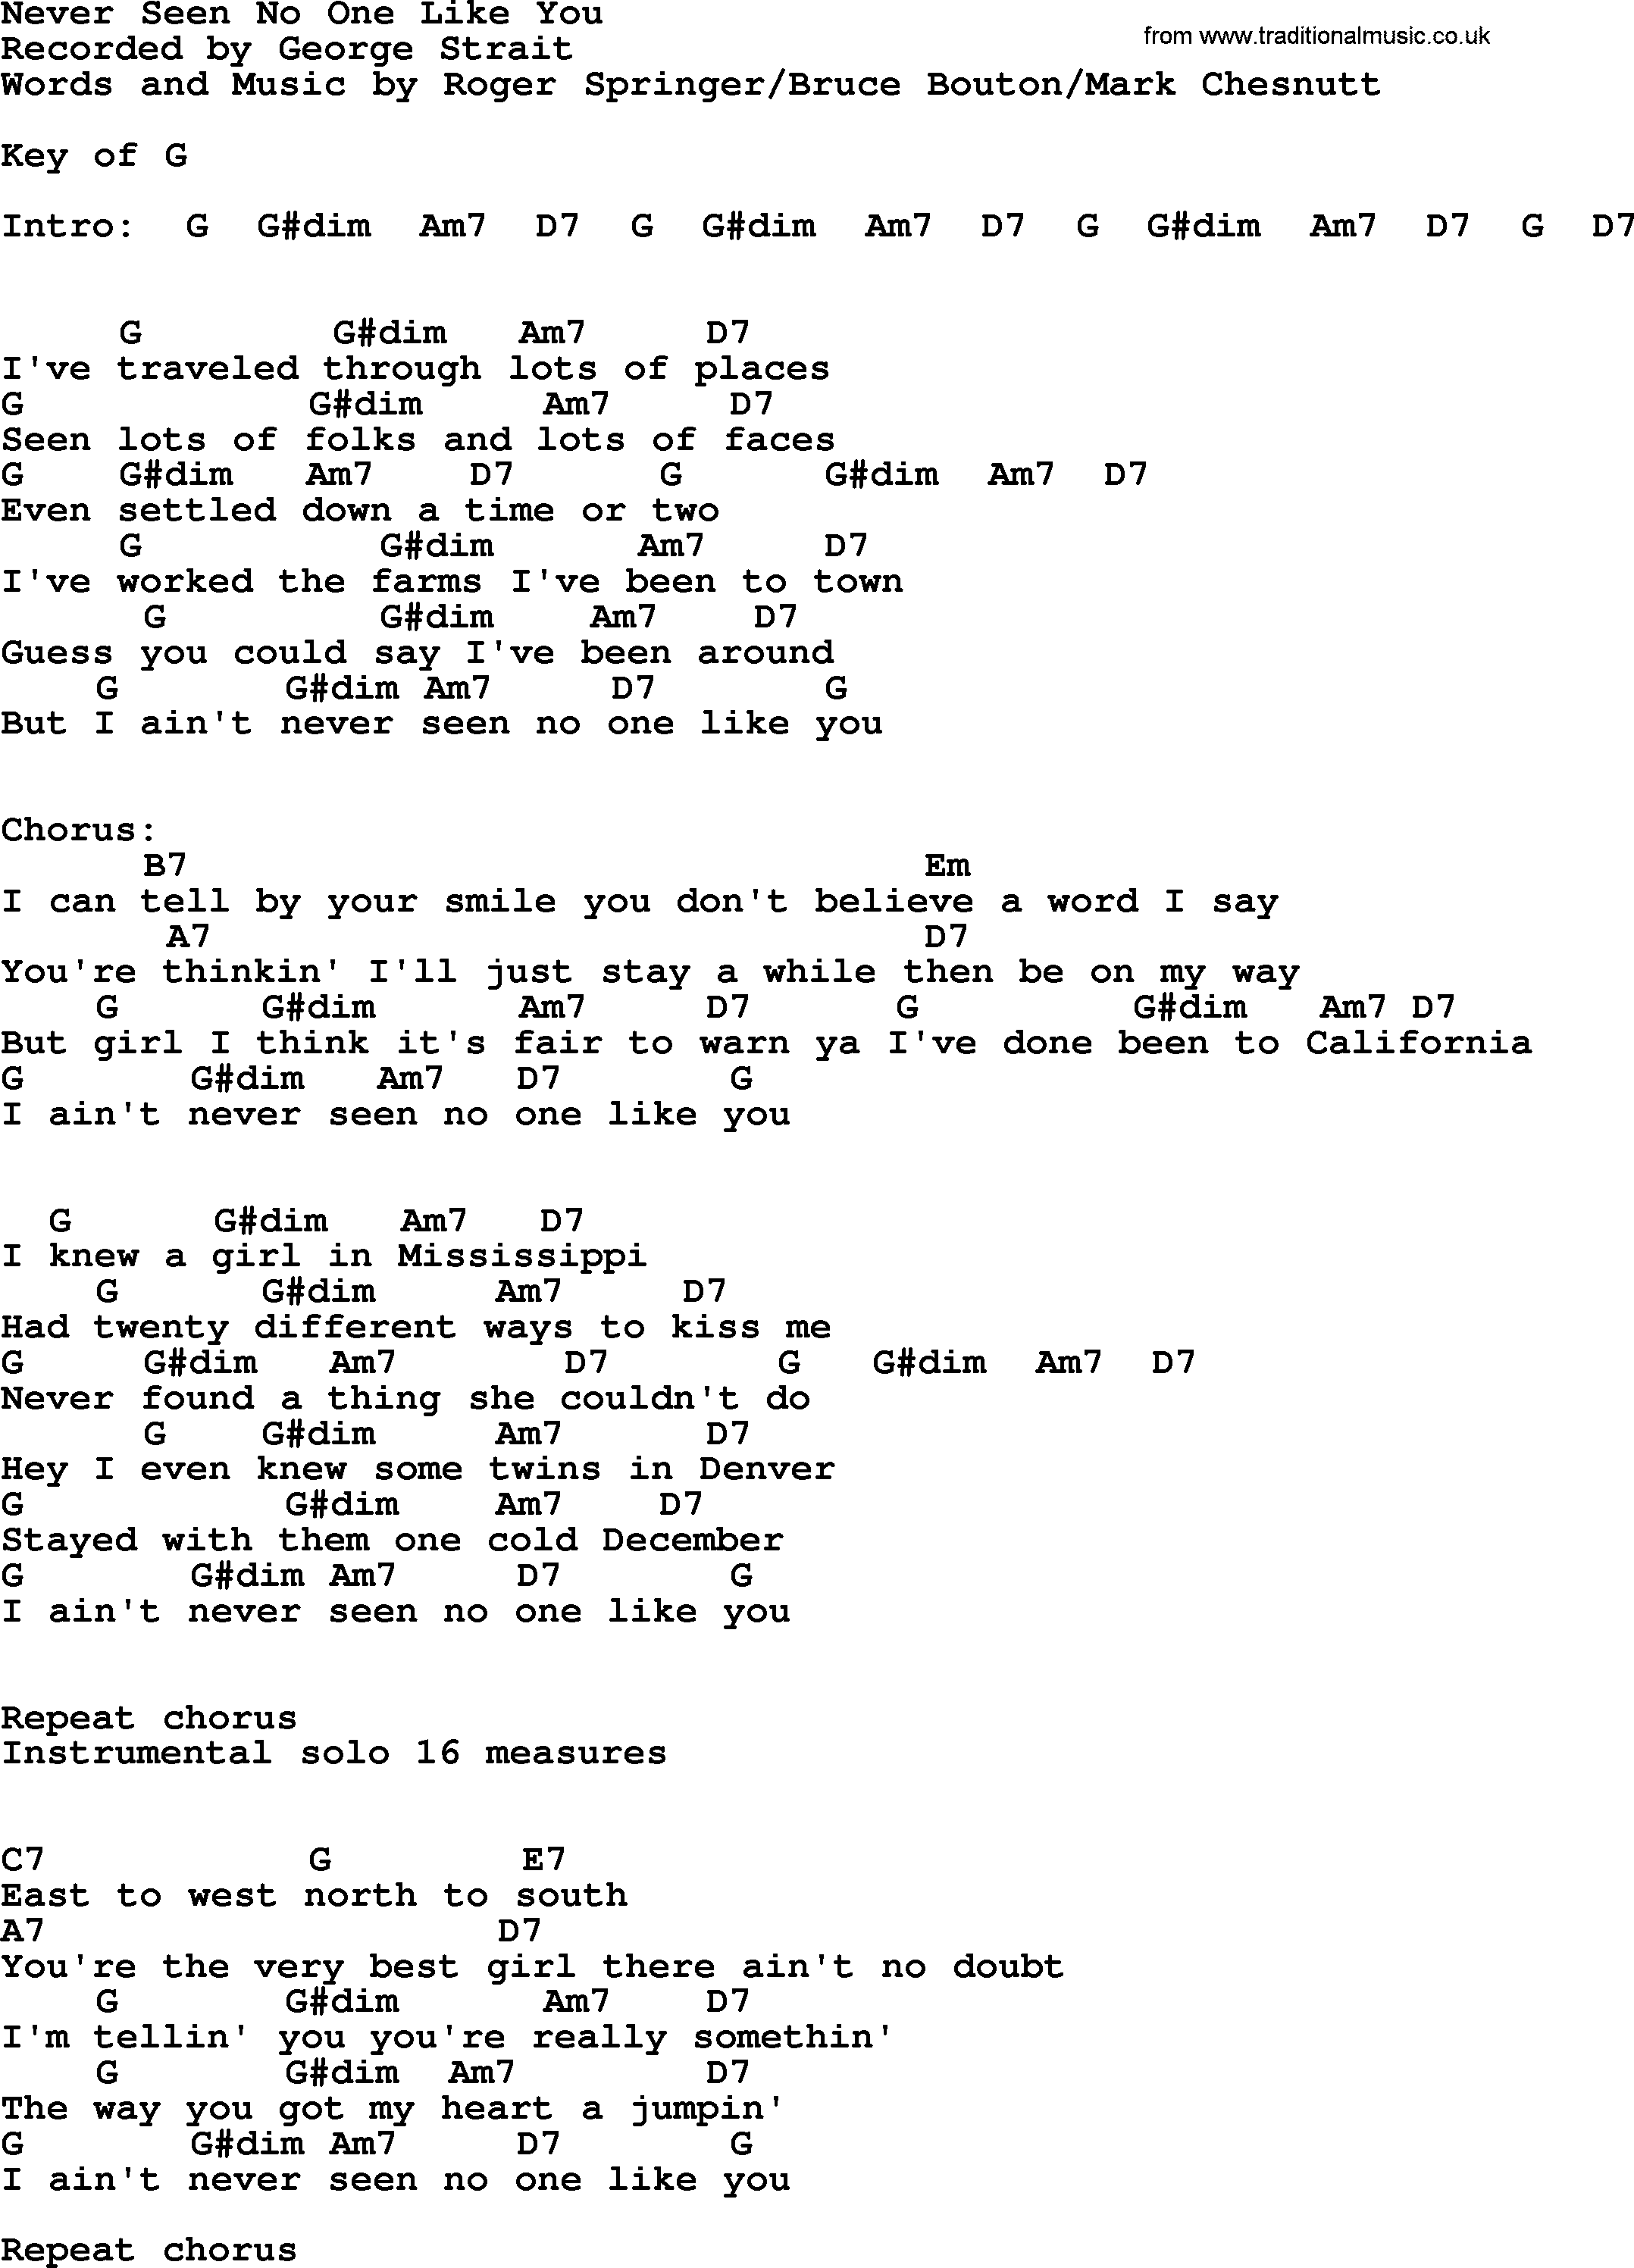 George Strait song: Never Seen No One Like You, lyrics and chords